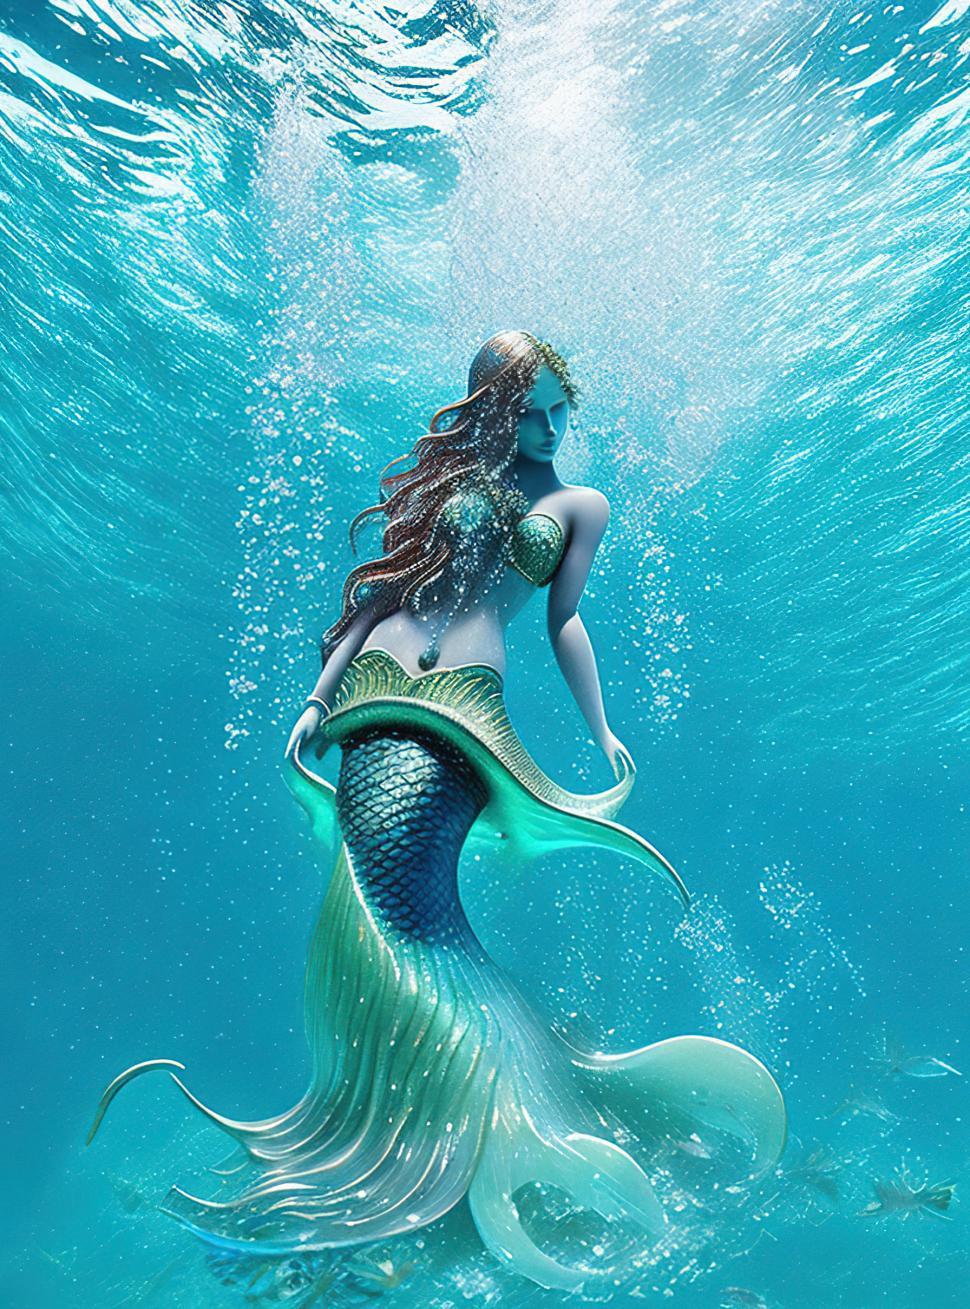 Download Free Stock Photo of Mermaid under the sea  